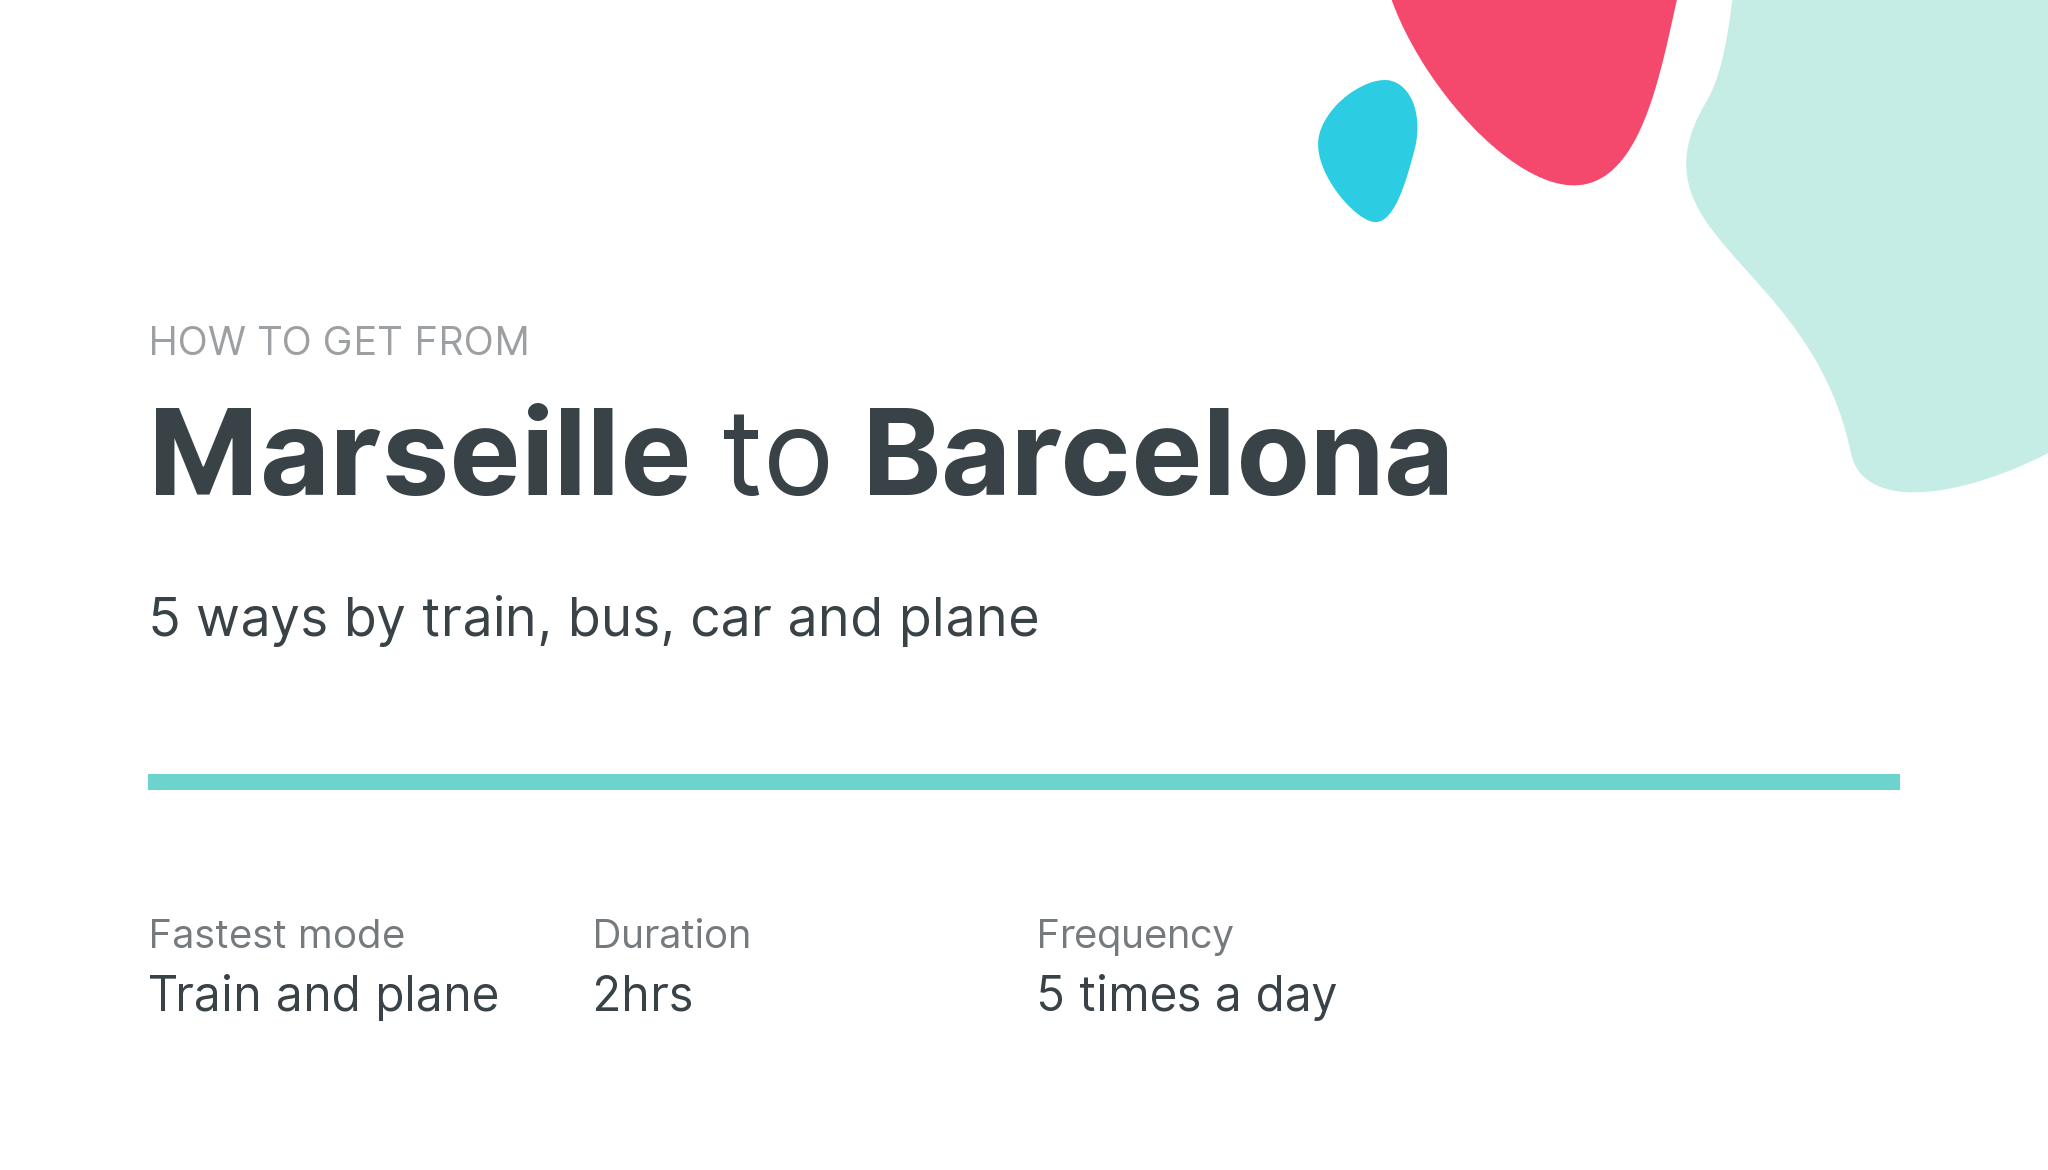 How do I get from Marseille to Barcelona